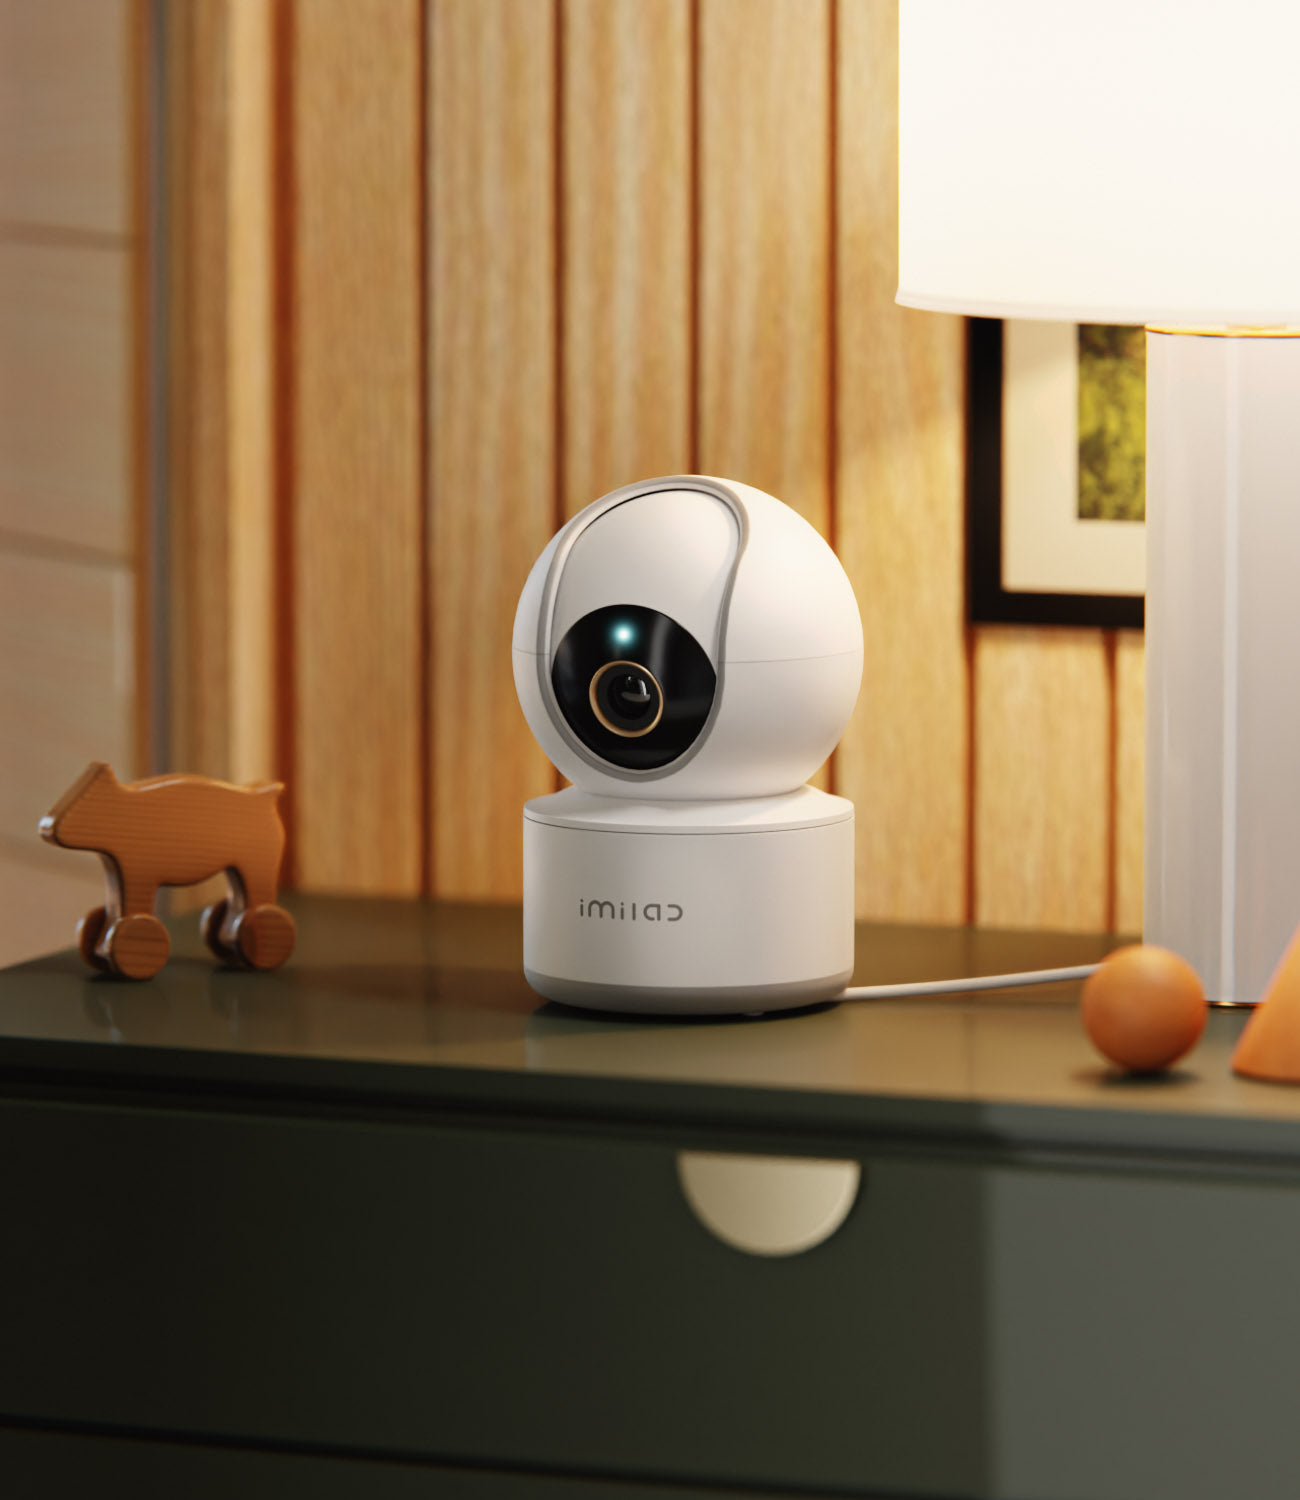 white-mini-round-surveillance-camera-on-dark-green-bed-side-table-with-wooden-cow-toy-beside-it